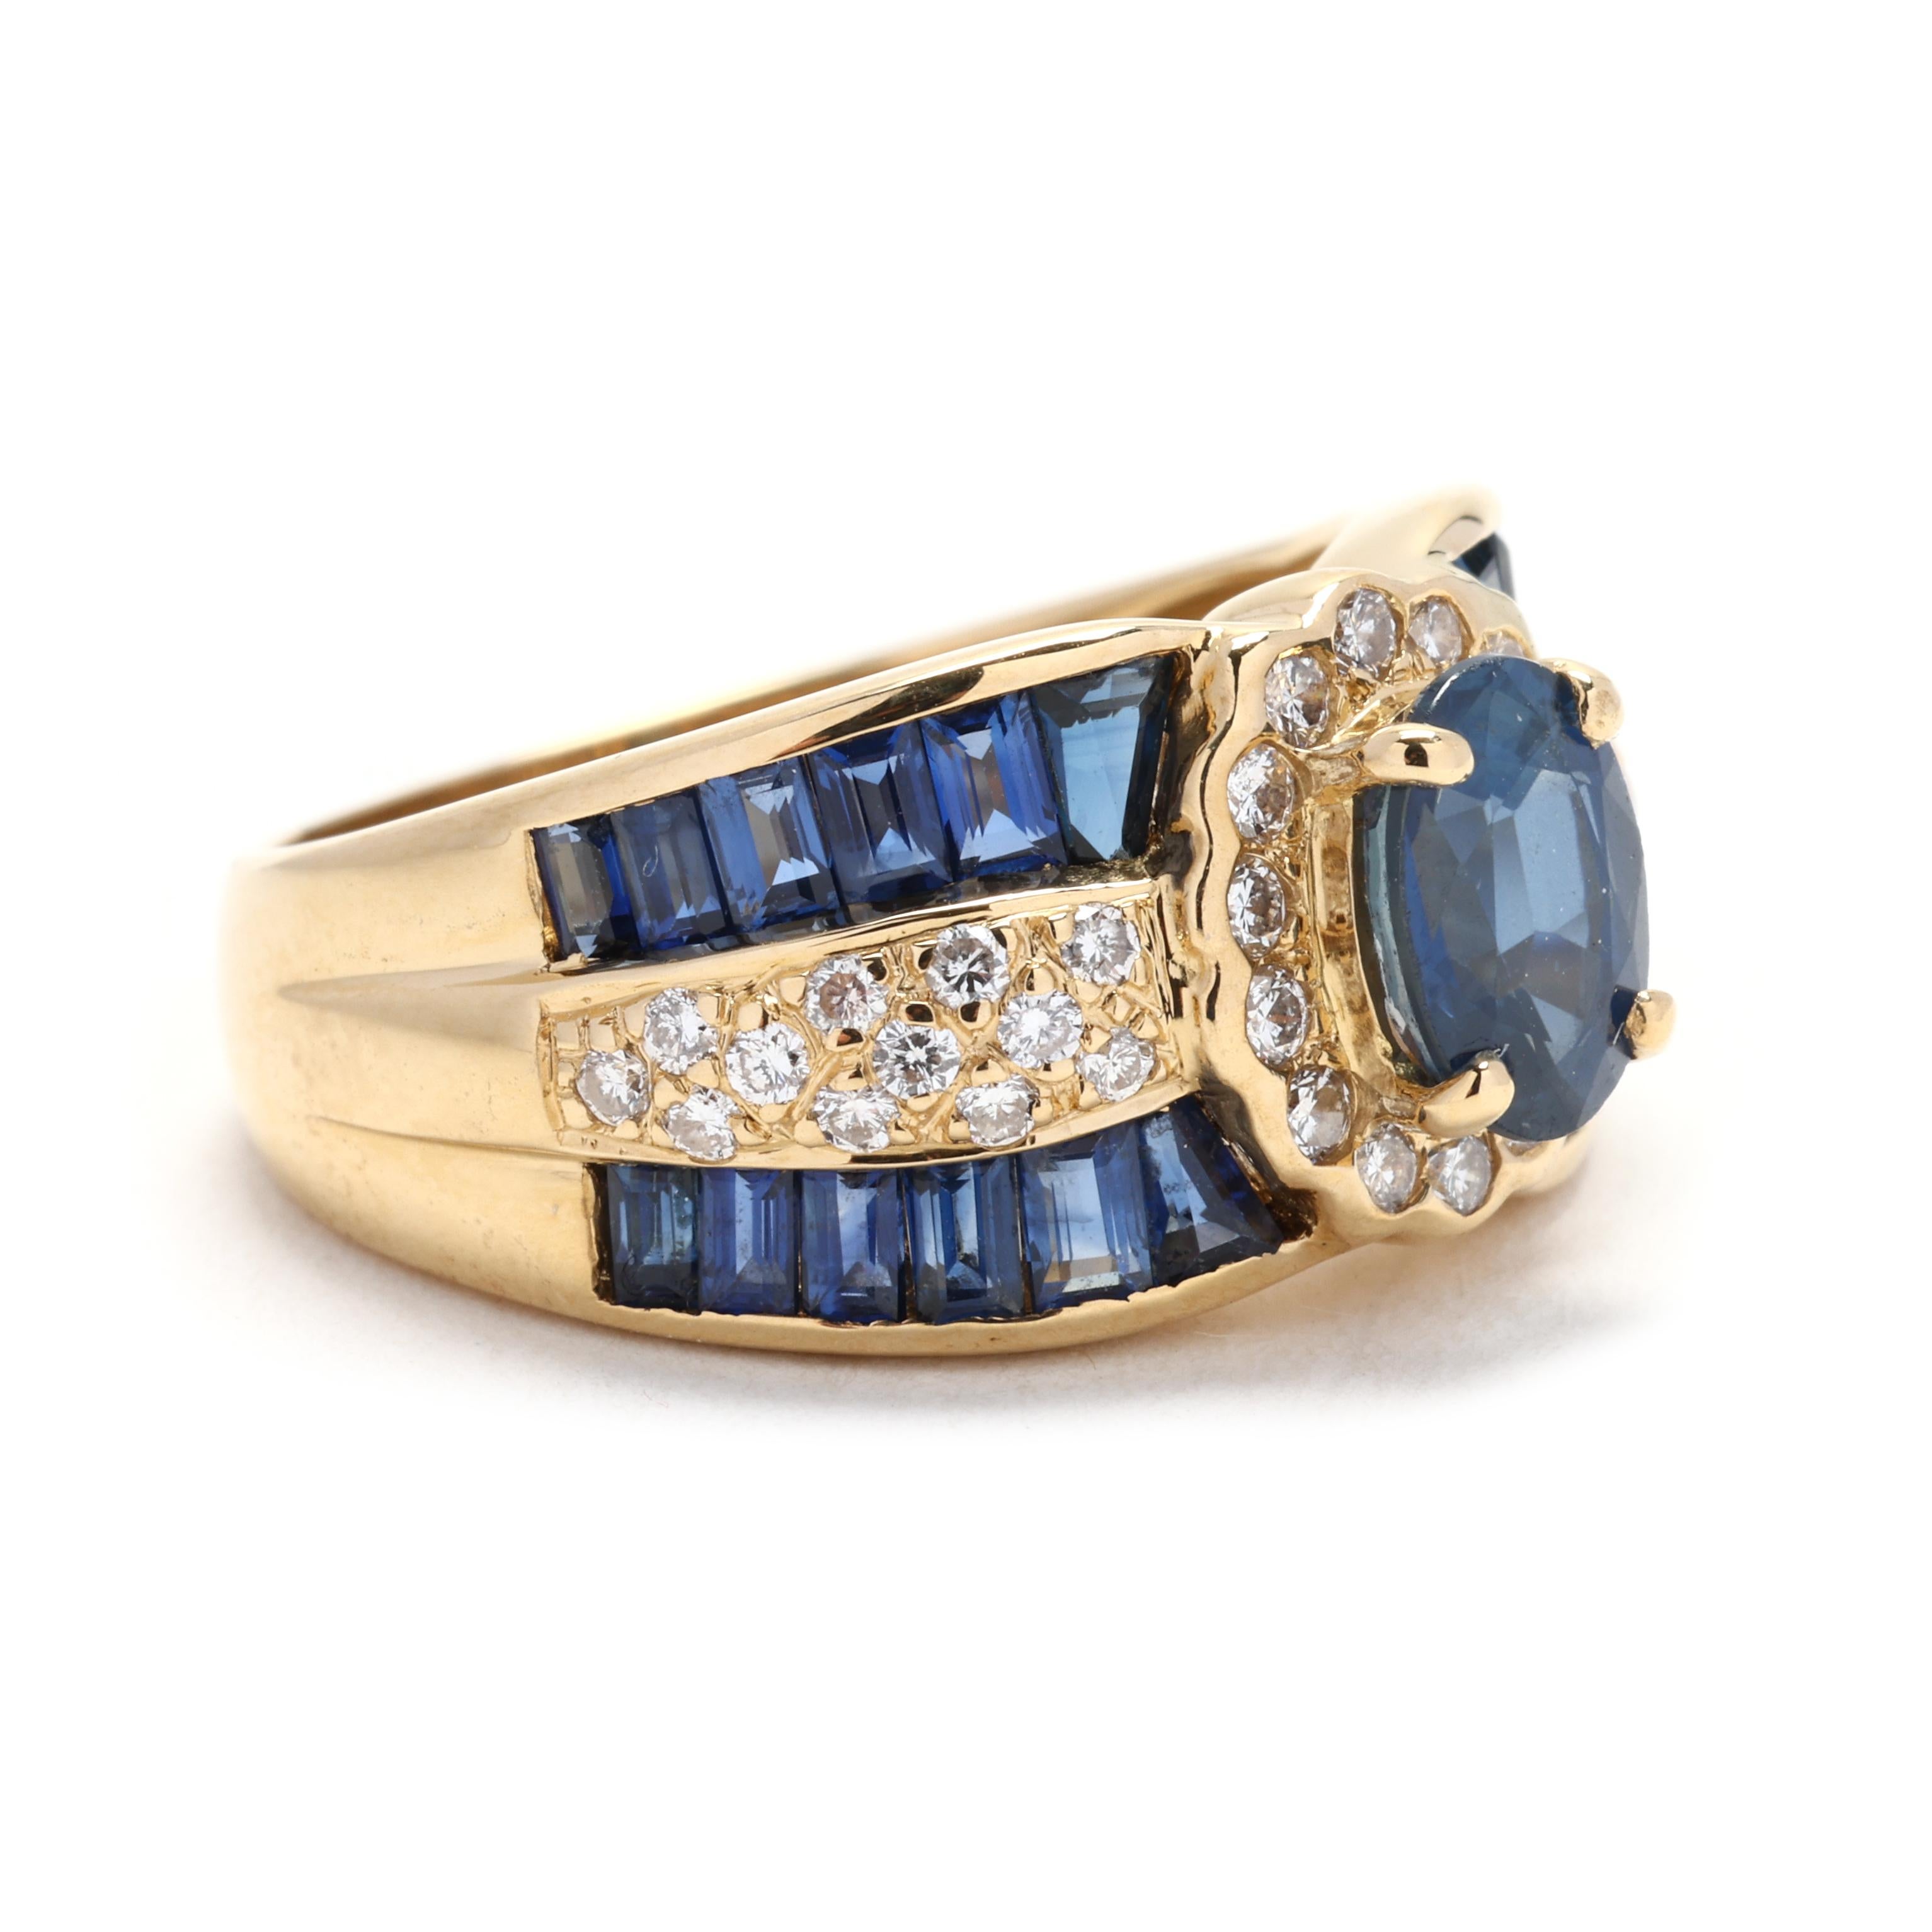 This stunning multi-stone sapphire and diamond cocktail ring is crafted in 14K yellow gold and is available in a ring size 6. The ring features a vibrant array of blue colored sapphire stones set in a cluster design. These gemstones are complemented